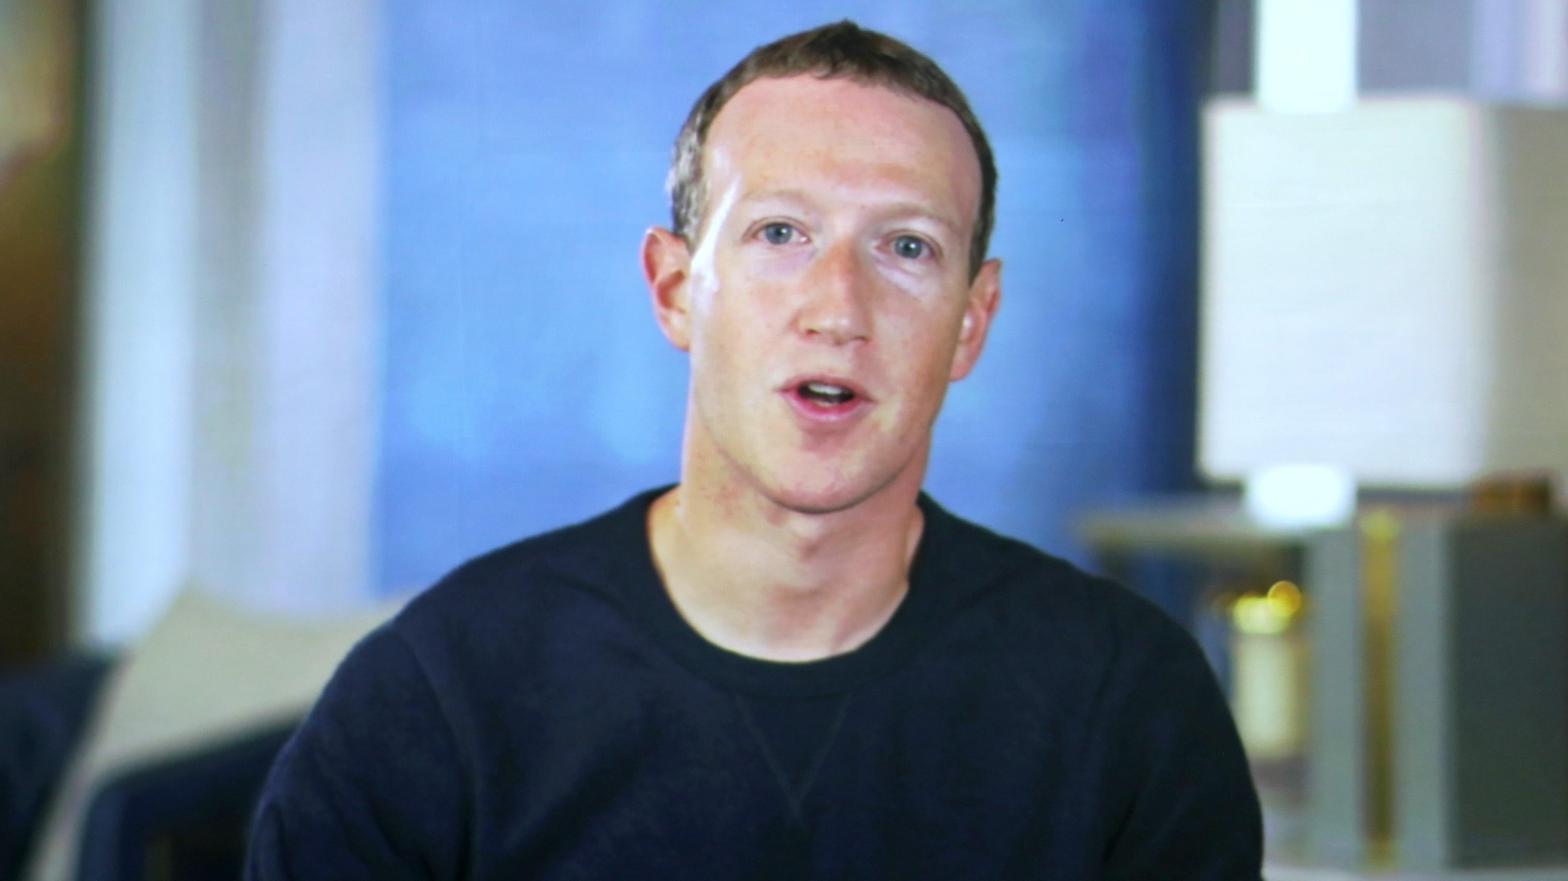 Mark Zuckerberg, via video,  speaks at Into the Metaverse: Creators,  Commerce and Connection during the 2022 SXSW Conference and Festivals at  Austin Convention Centre on March 15, 2022 in Austin, Texas. (Photo: Samantha Burkardt, Getty Images)